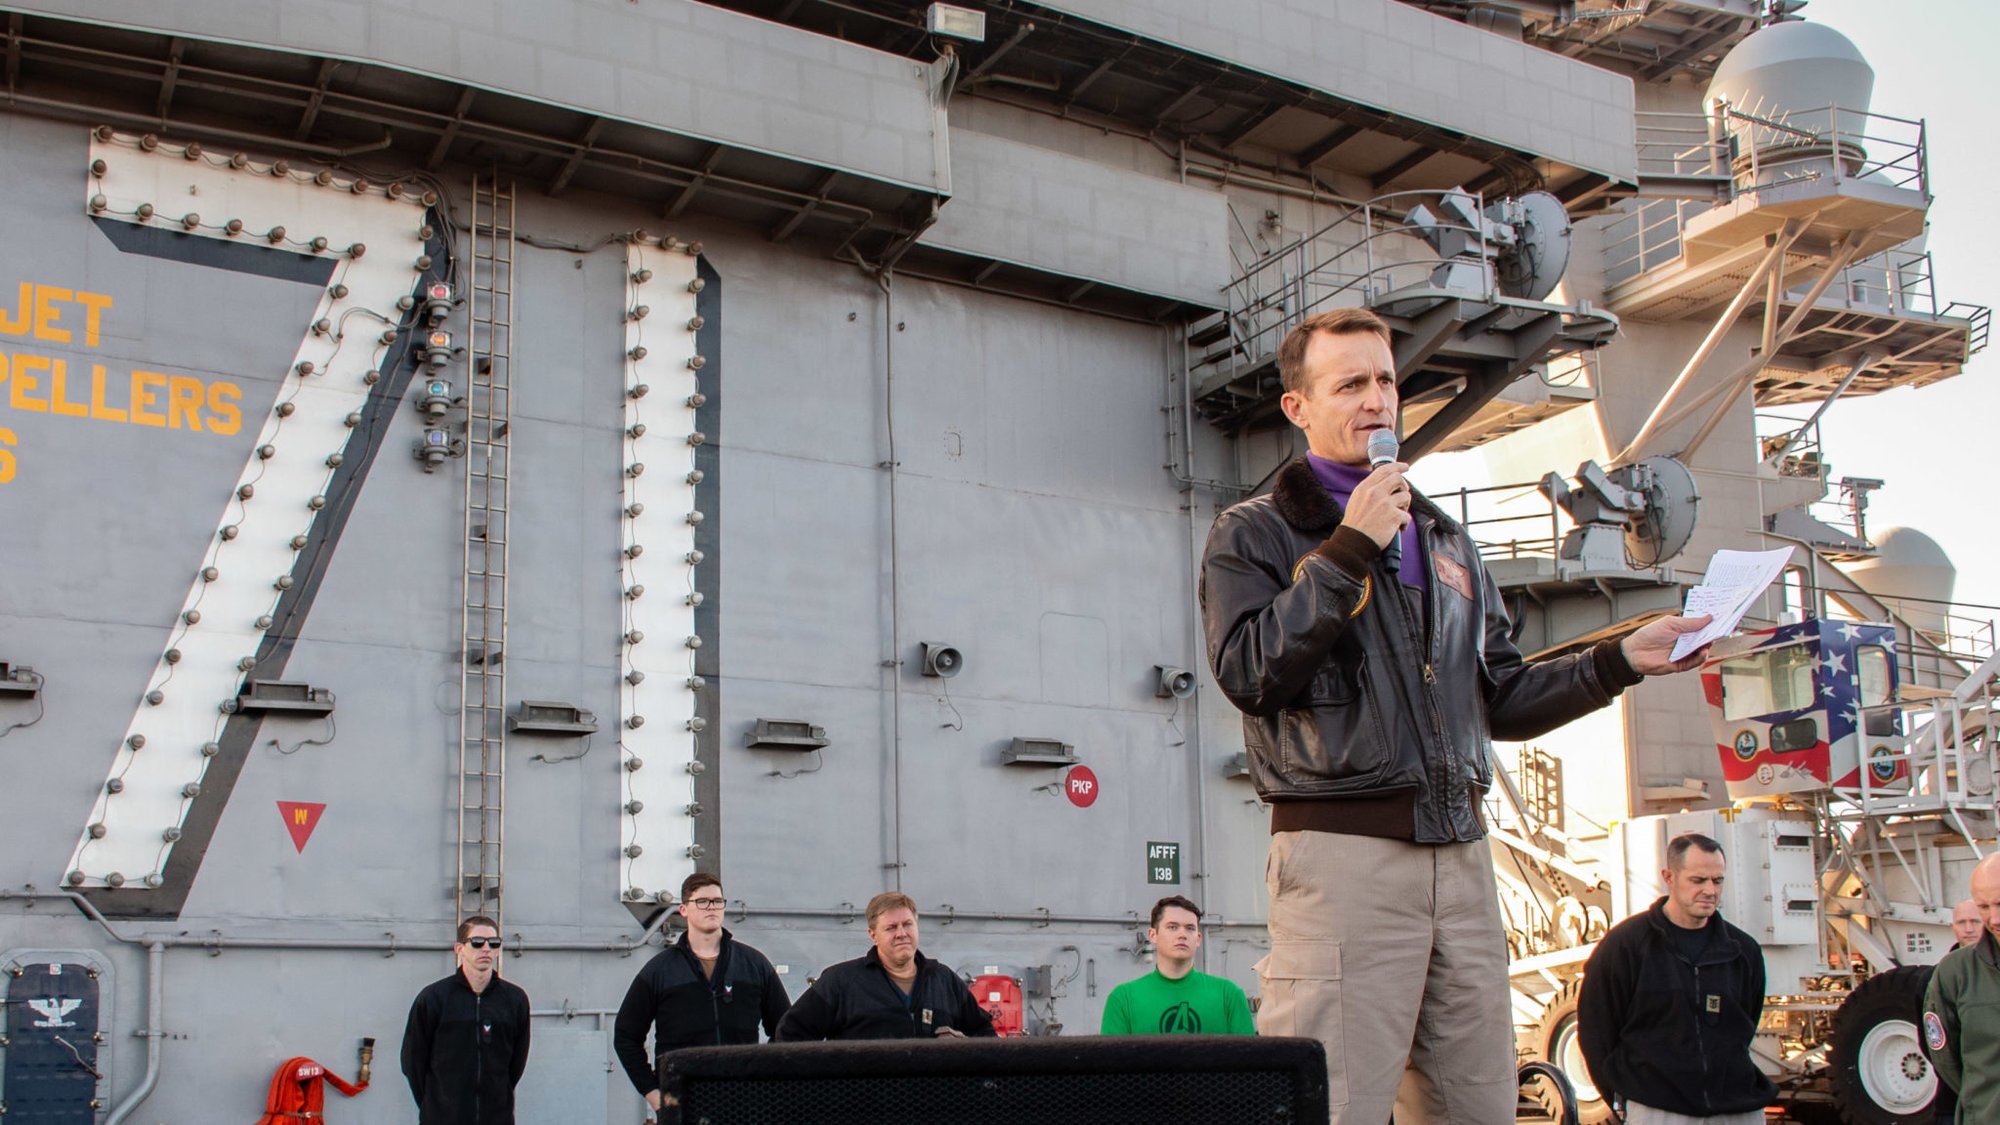 191215-N-KB540-3097 PACIFIC OCEAN (Dec. 19, 2019) Capt. Brett Crozier, commanding officer of the aircraft carrier USS Theodore Roosevelt (CVN 71), gives remarks during an all-hands call on the ship’s flight deck Dec. 15, 2019. Theodore Roosevelt is underway conducting routine training in the Eastern Pacific Ocean. (U.S. Navy photo by Mass Communication Specialist Seaman Alexander Williams)